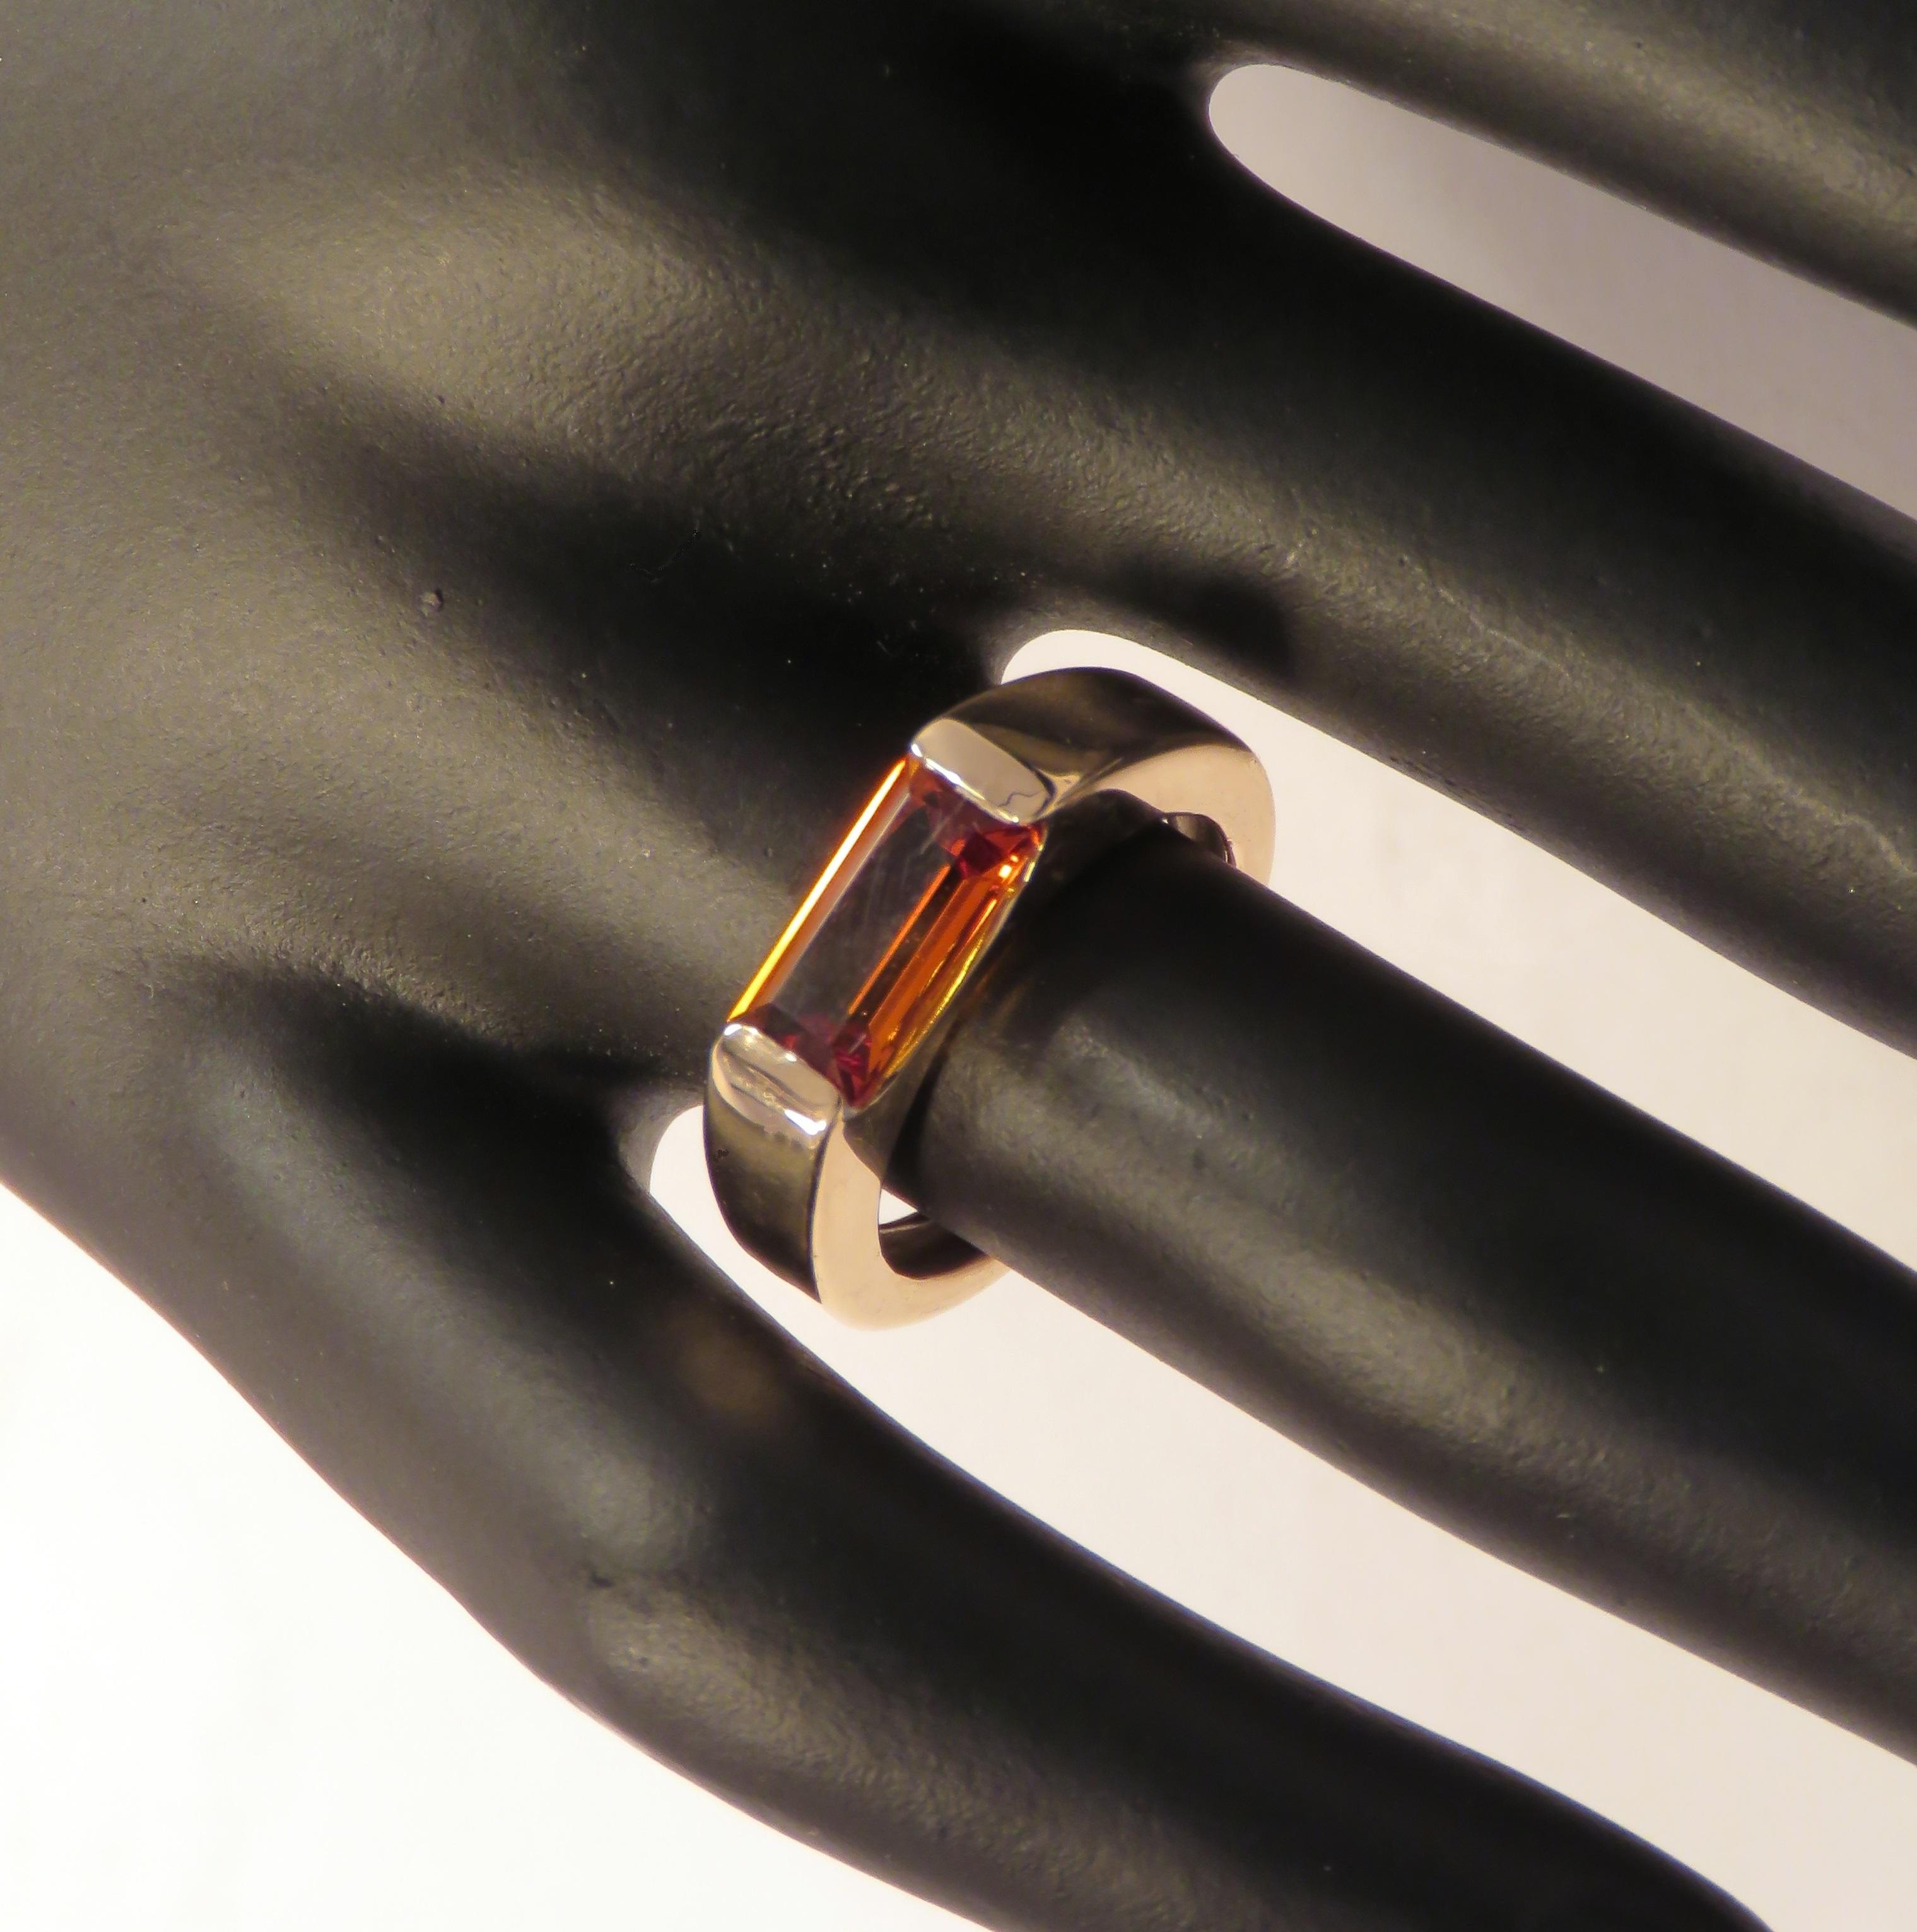 Very stylish modern band ring crafted in 9k rose gold featuring at the centre a baguette cut natural gold topaz weighing 1.5 ctw. The dimension of the gemstone is 10 x 5 millimeters / 0.393 x 0.196 inches. This ring is also available with baguette